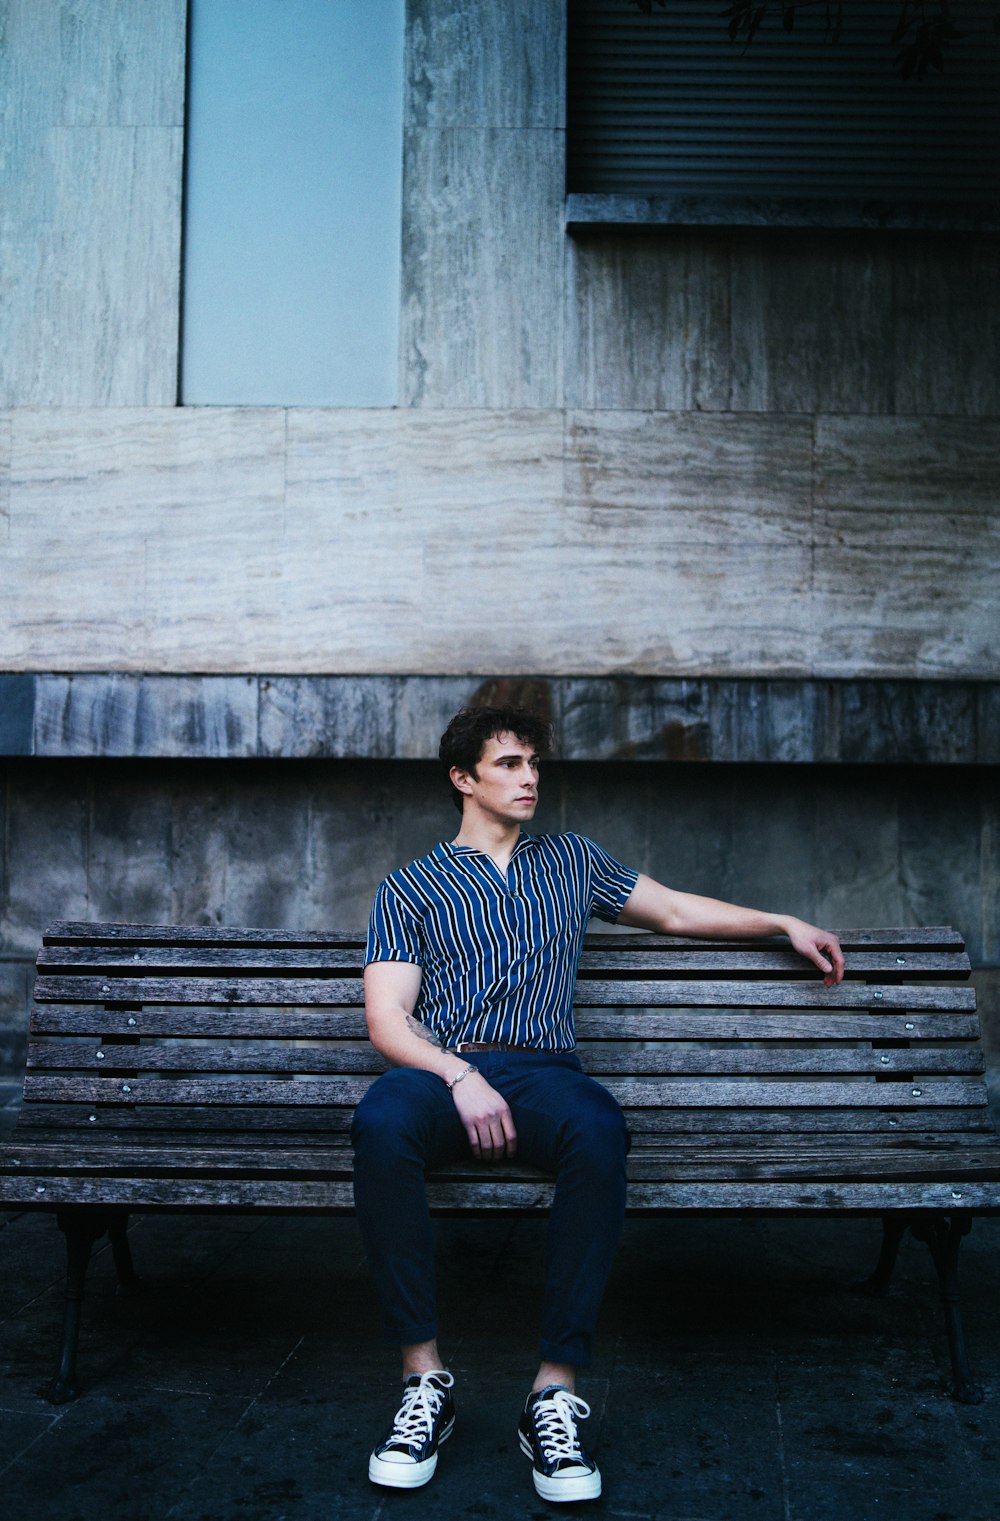 man in black and white striped shirt sitting on brown wooden bench